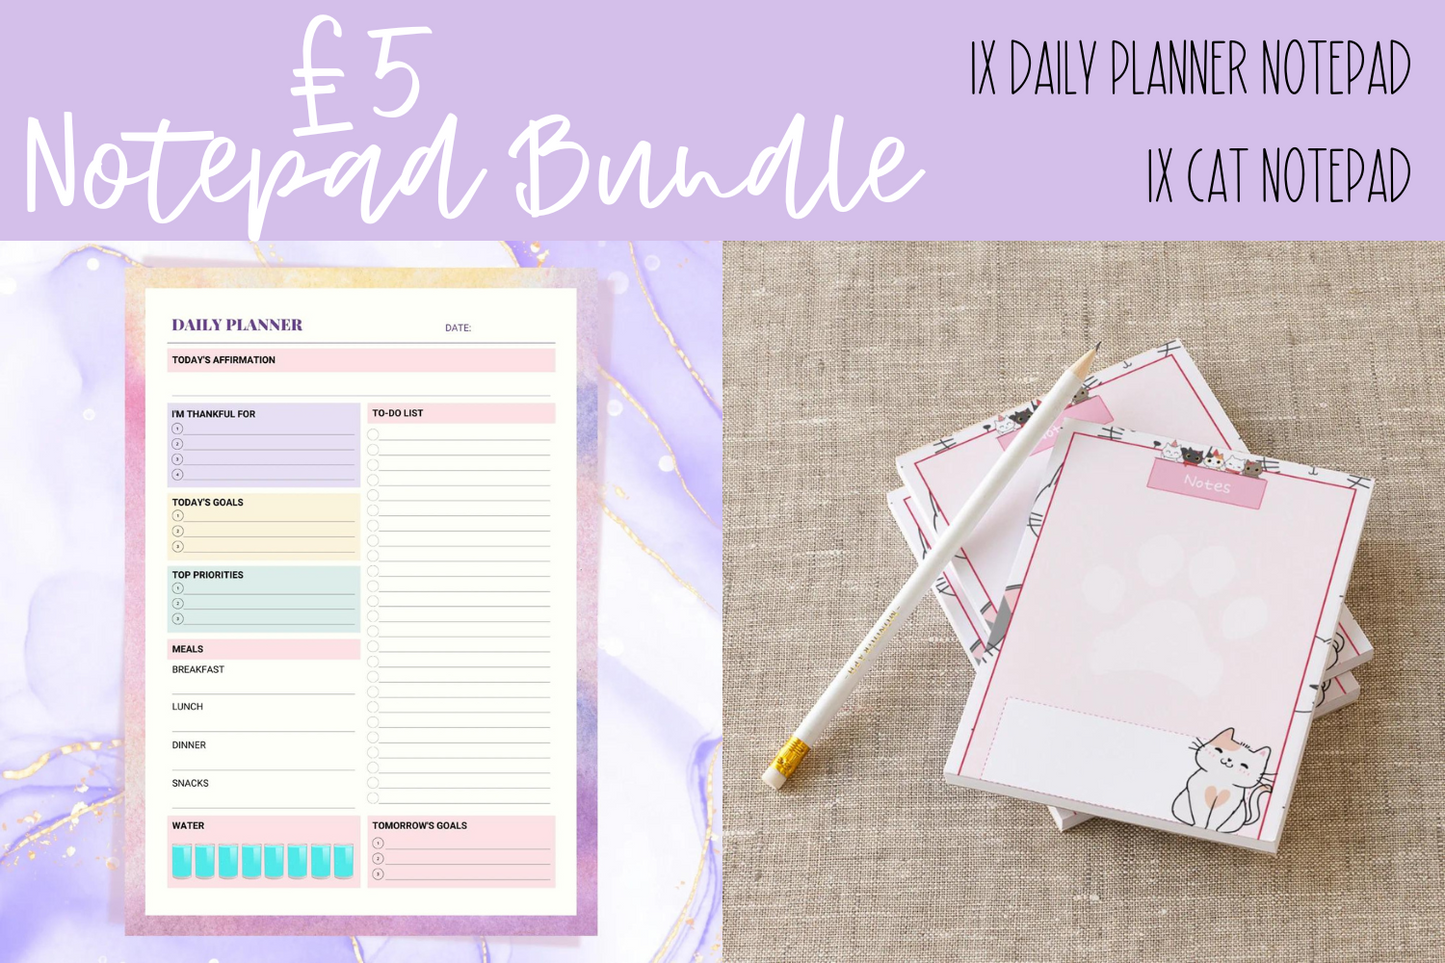 Daily Planner & Cat Notepad Bundle